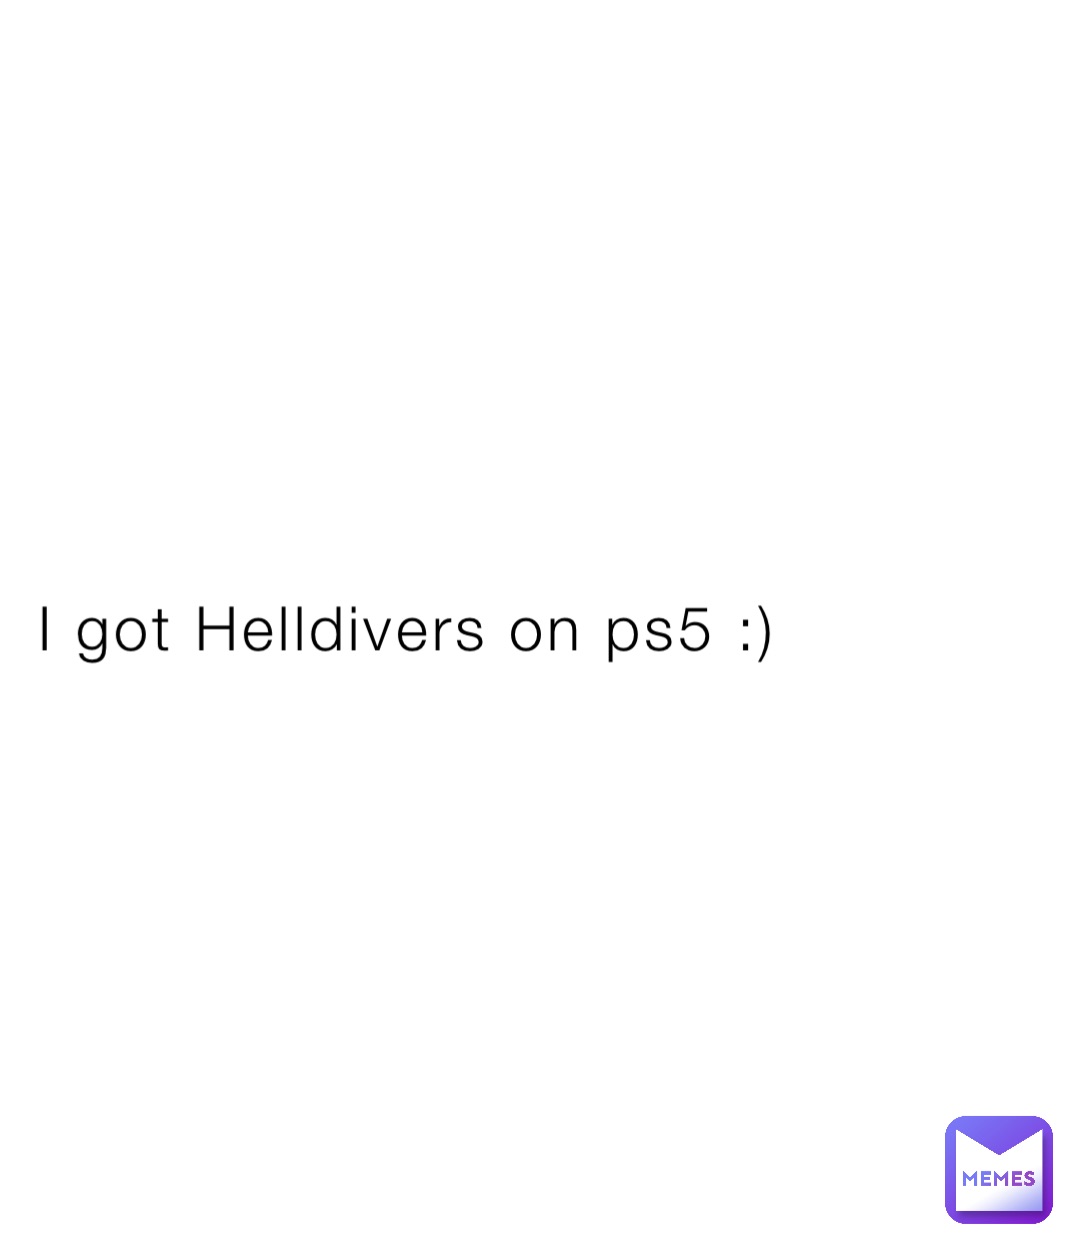 I got Helldivers on ps5 :)